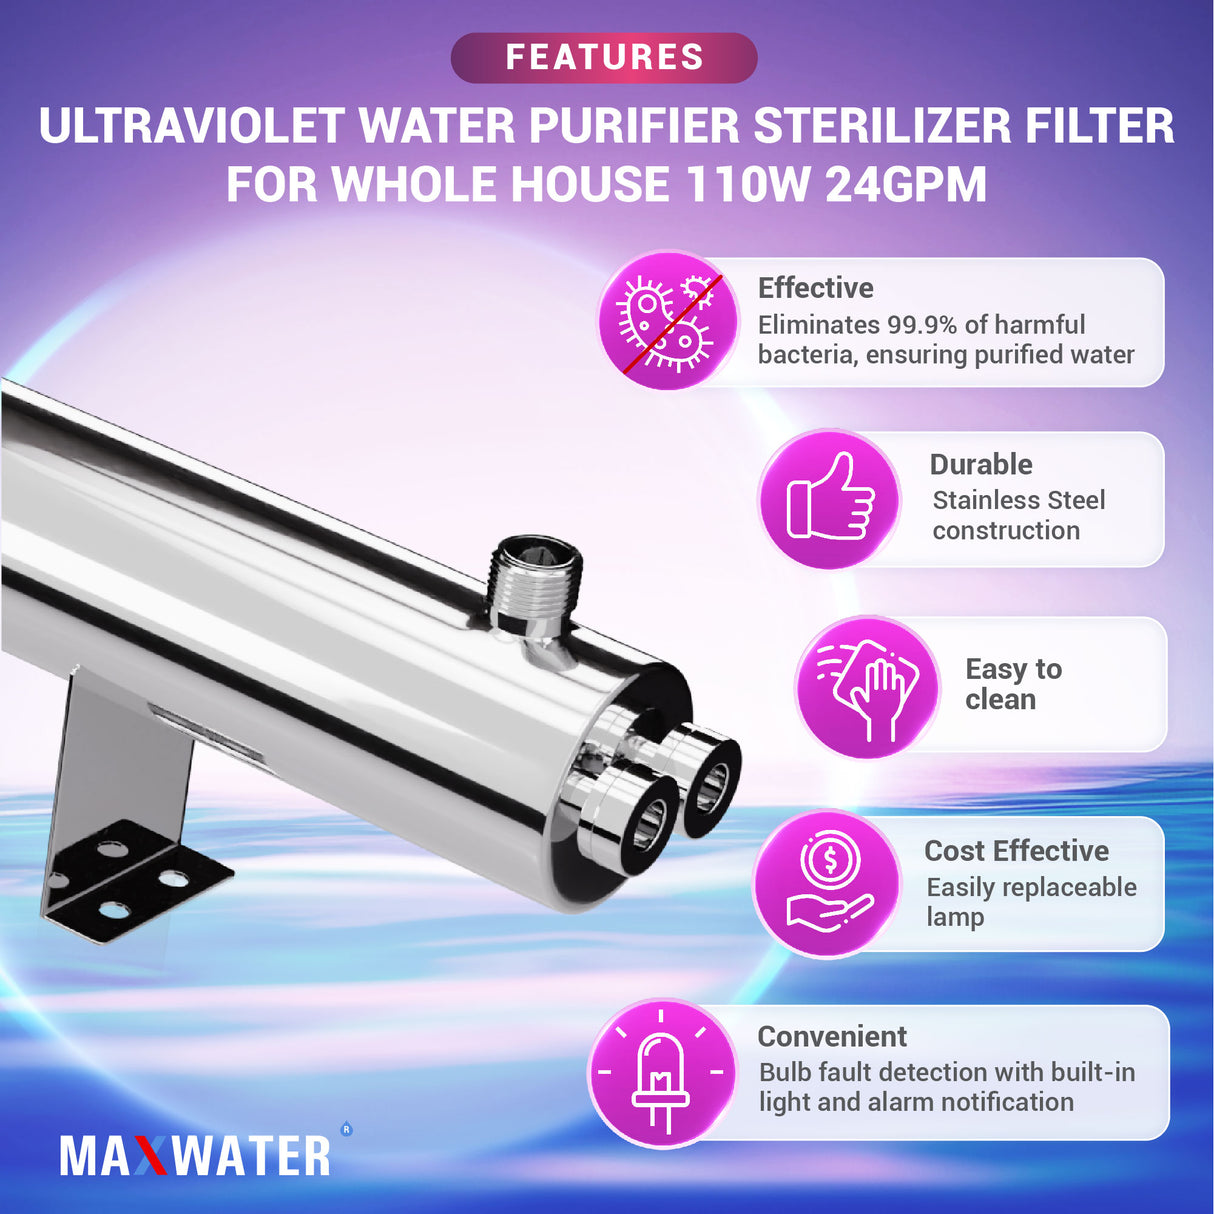 UV Light Water Filter Sterilizer, 110W, 24GPM - 1" Inlet/Outlet, Light and Audio Alarm Ballast